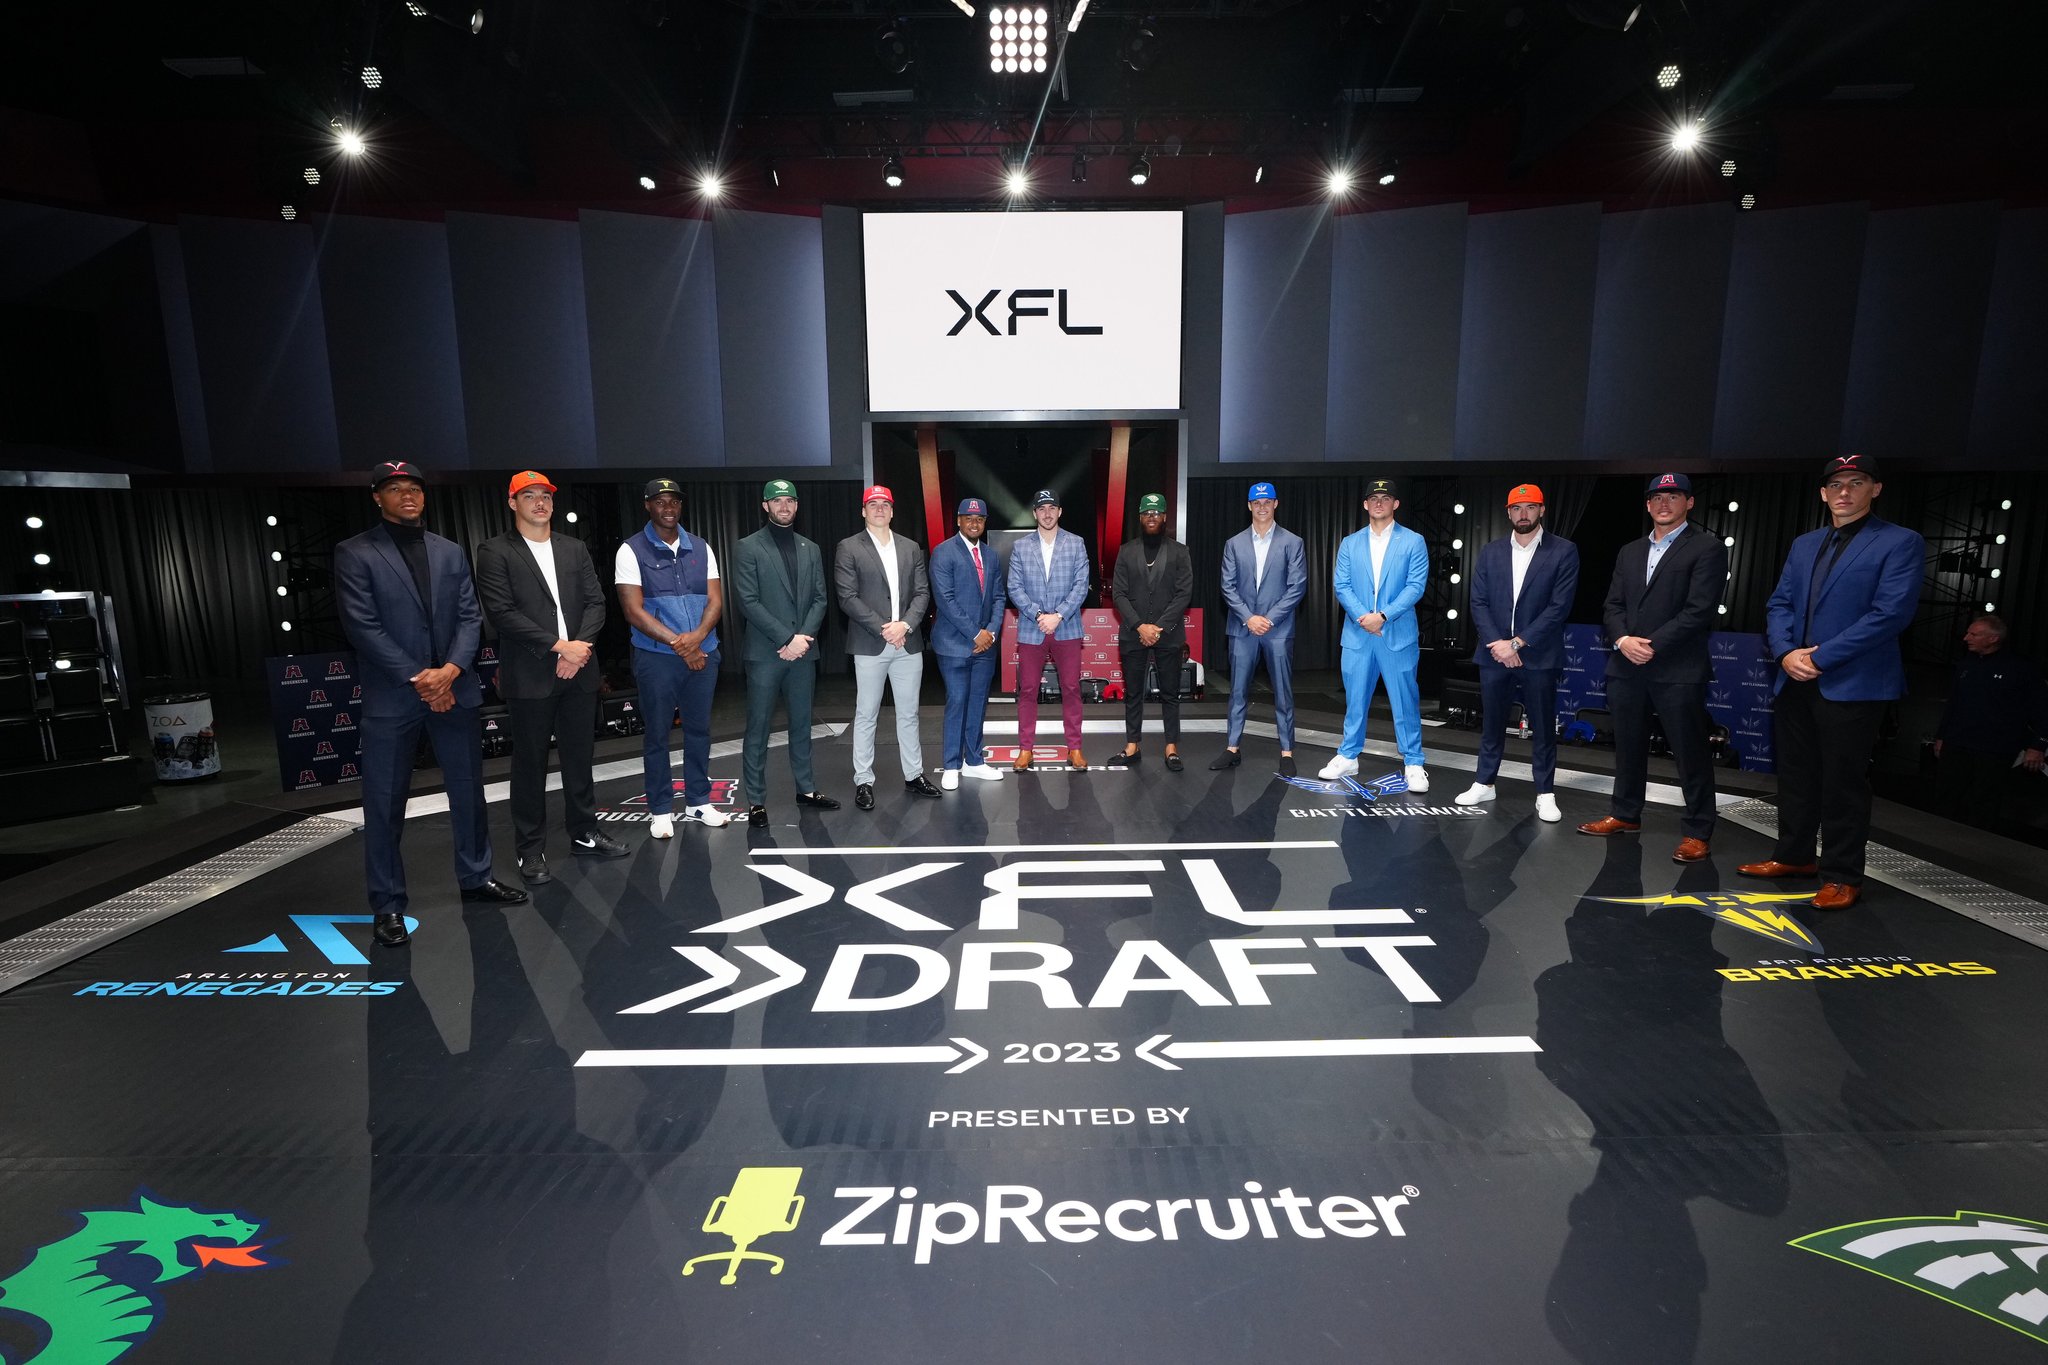 How To Watch The XFL Draft, Start Time, What Channel Is The XFL Draft